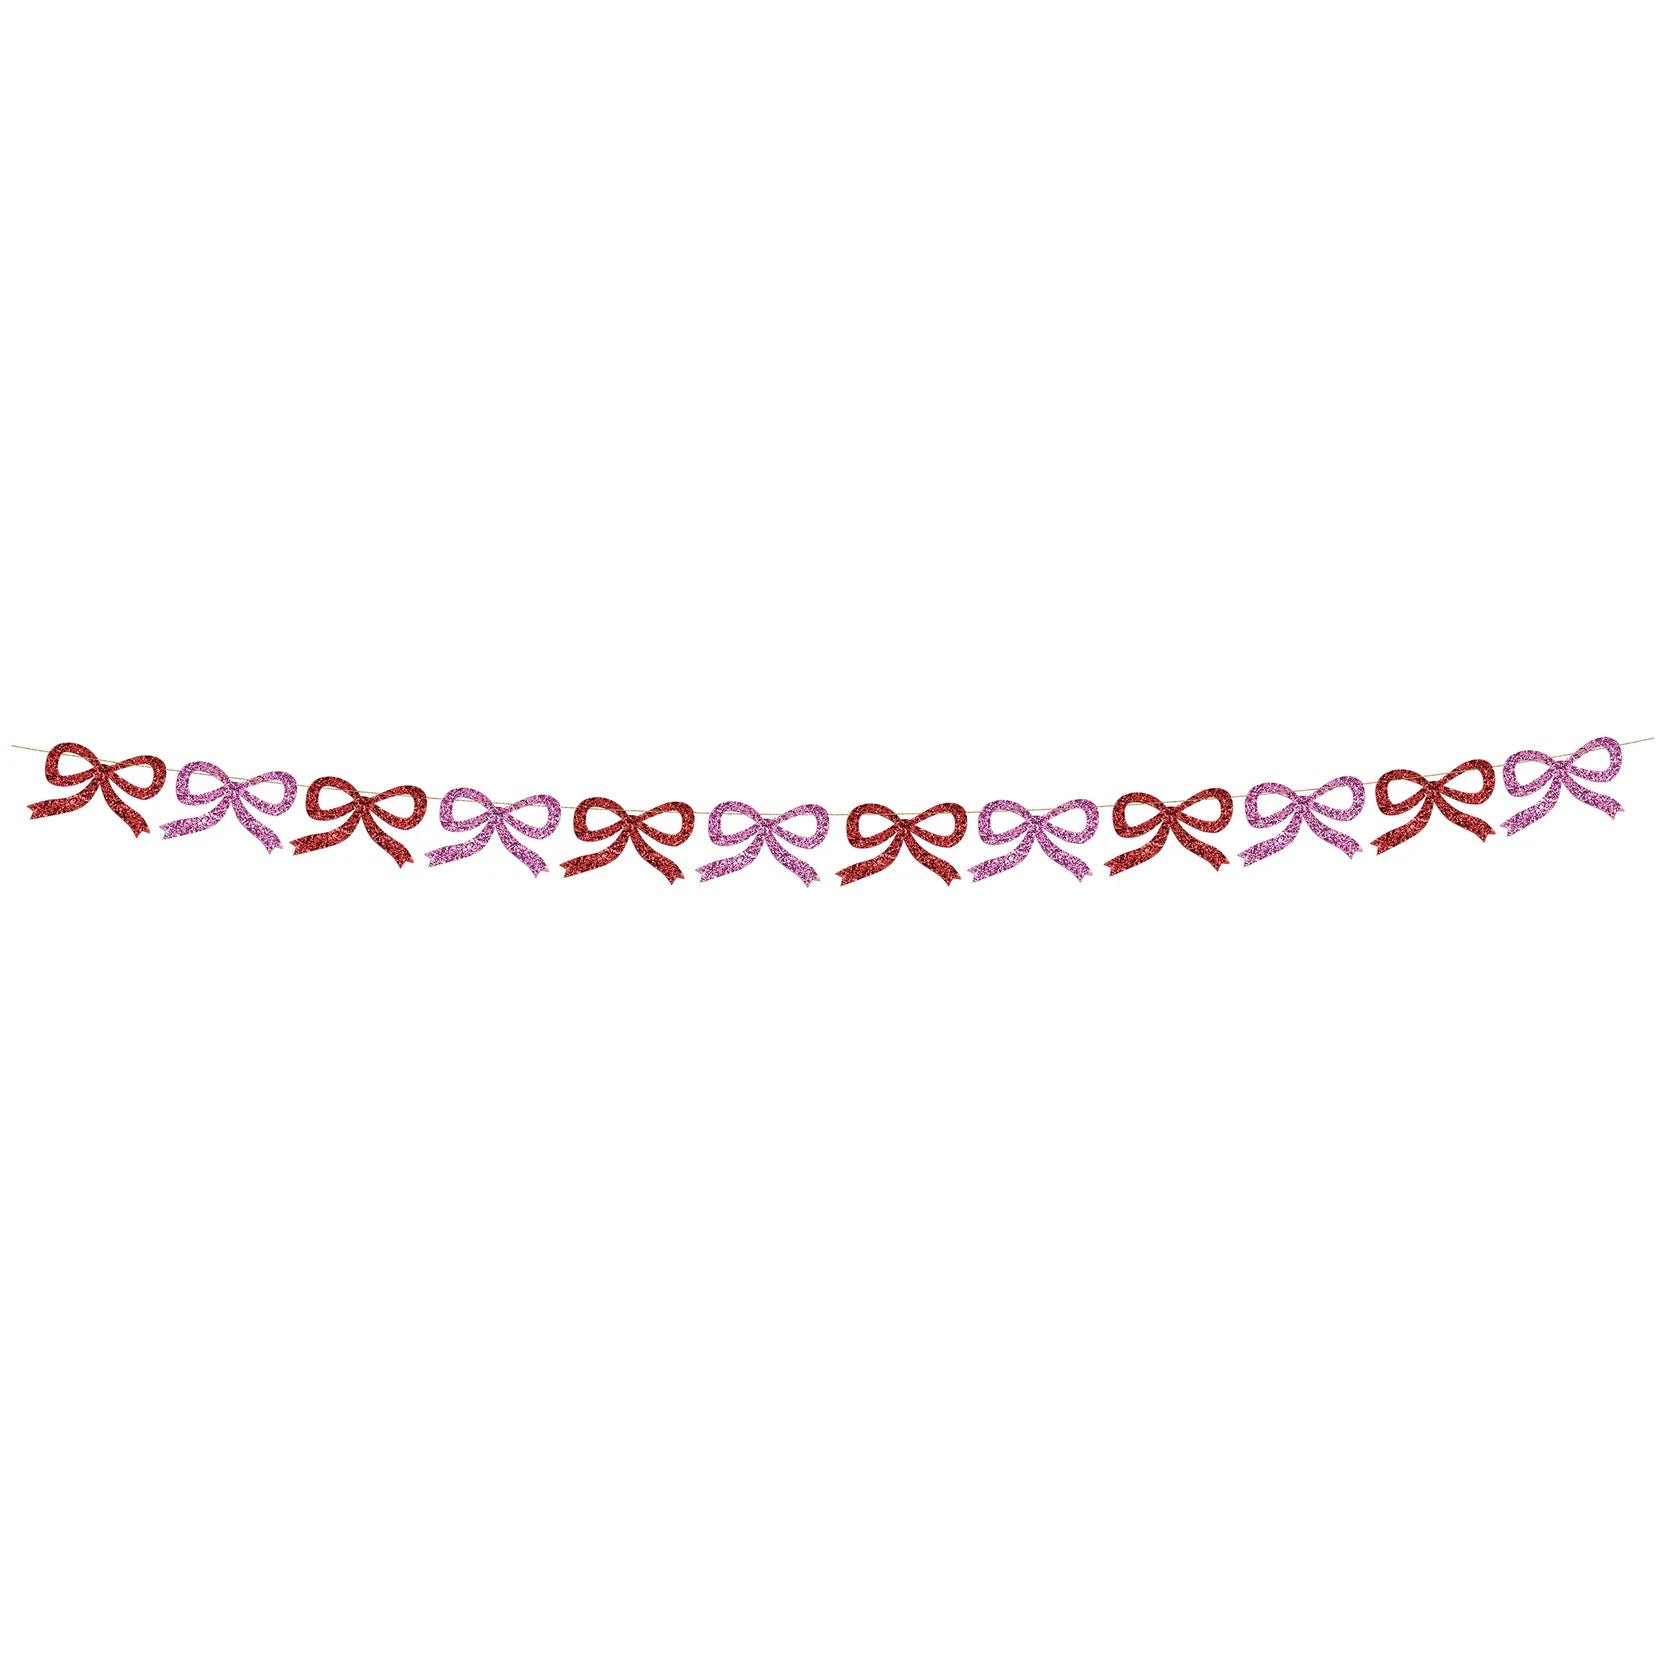 RED & PINK GLITTER BOW GARLAND